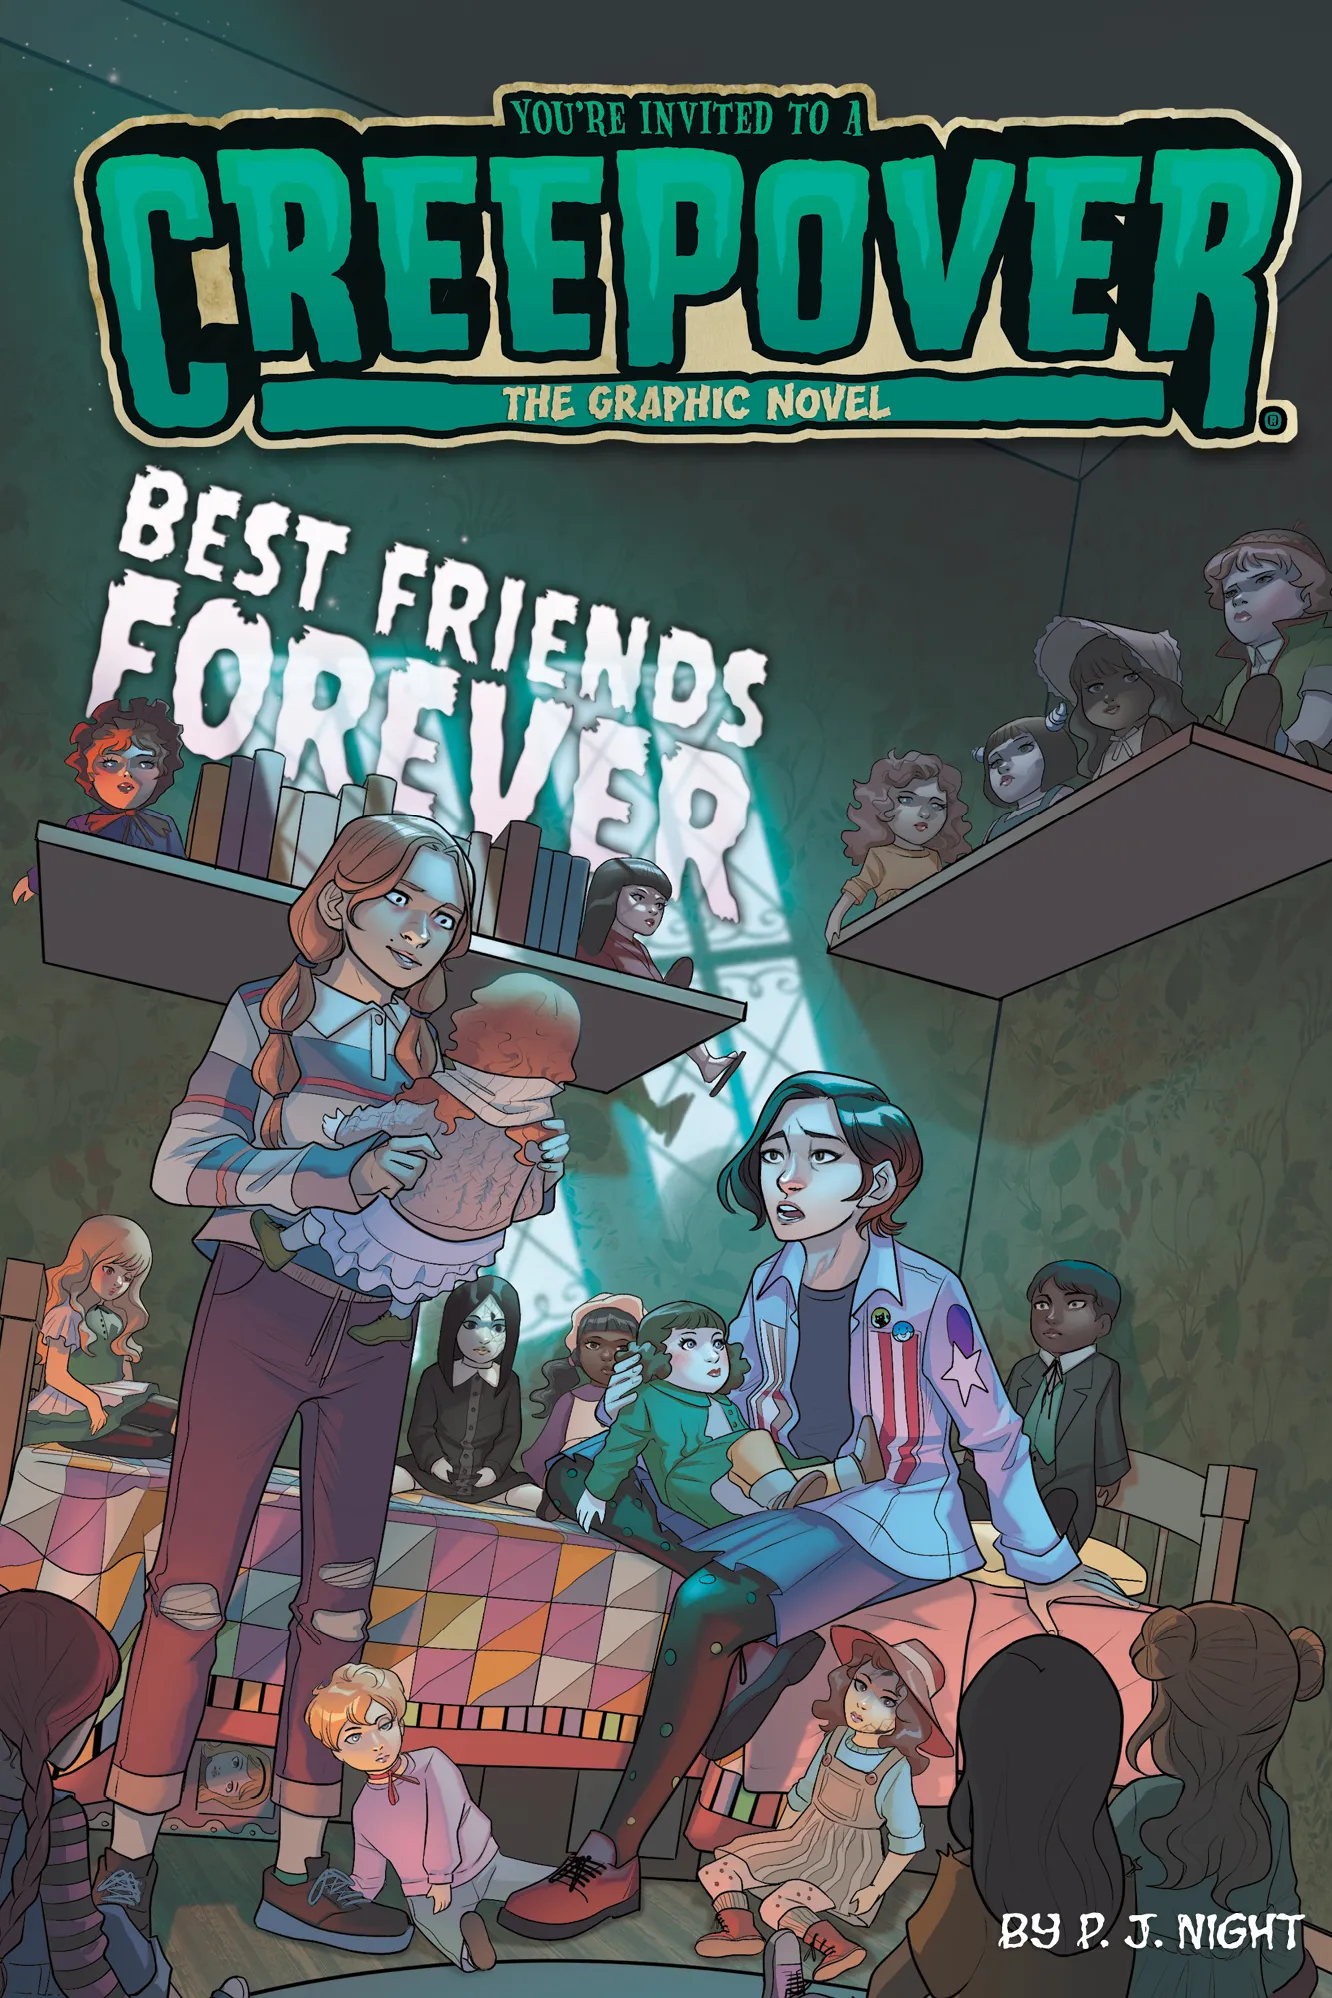 Best Friends Forever: The Graphic Novel (You're Invited to a Creepover Graphic Novels #6)